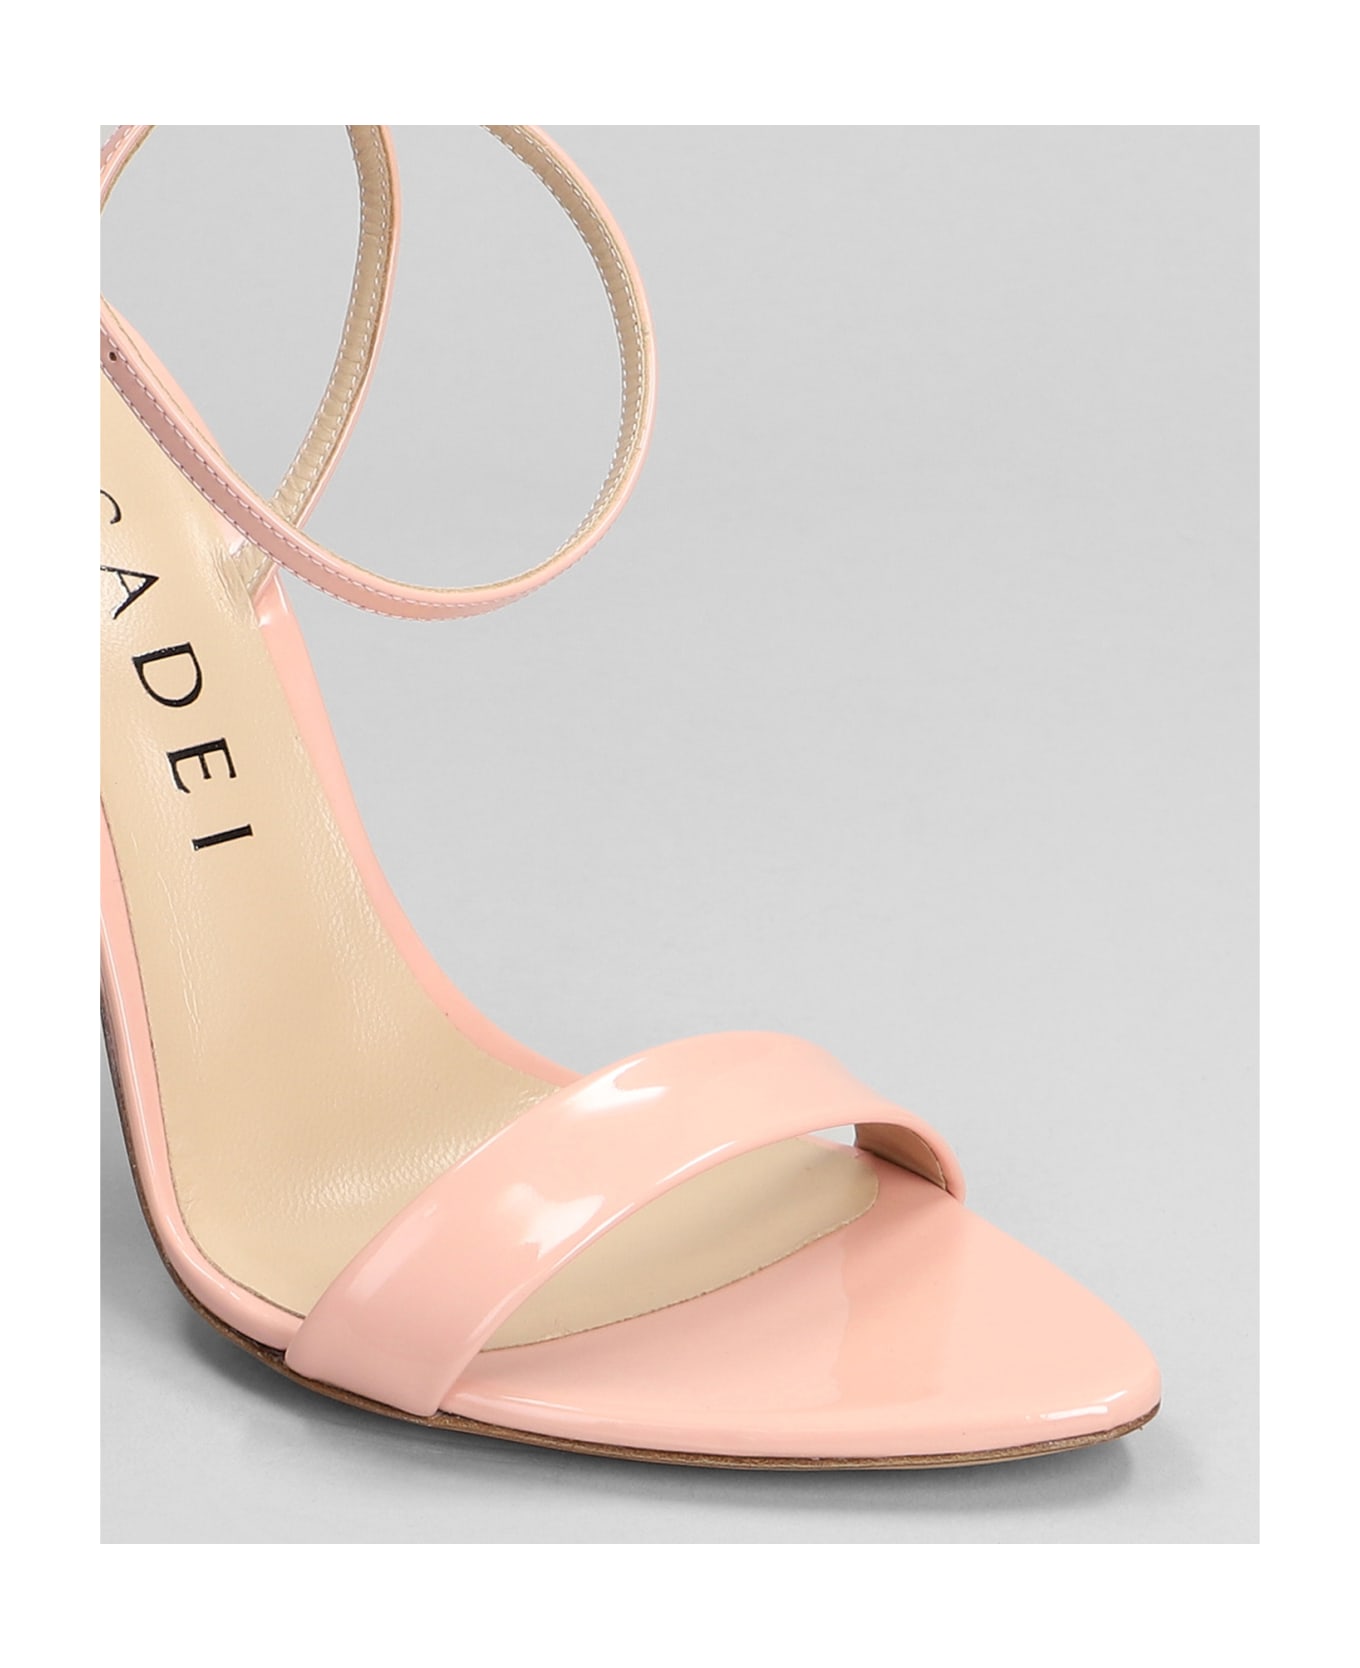 Casadei Scarlet Sandals In Rose-pink Patent Leather - rose-pink